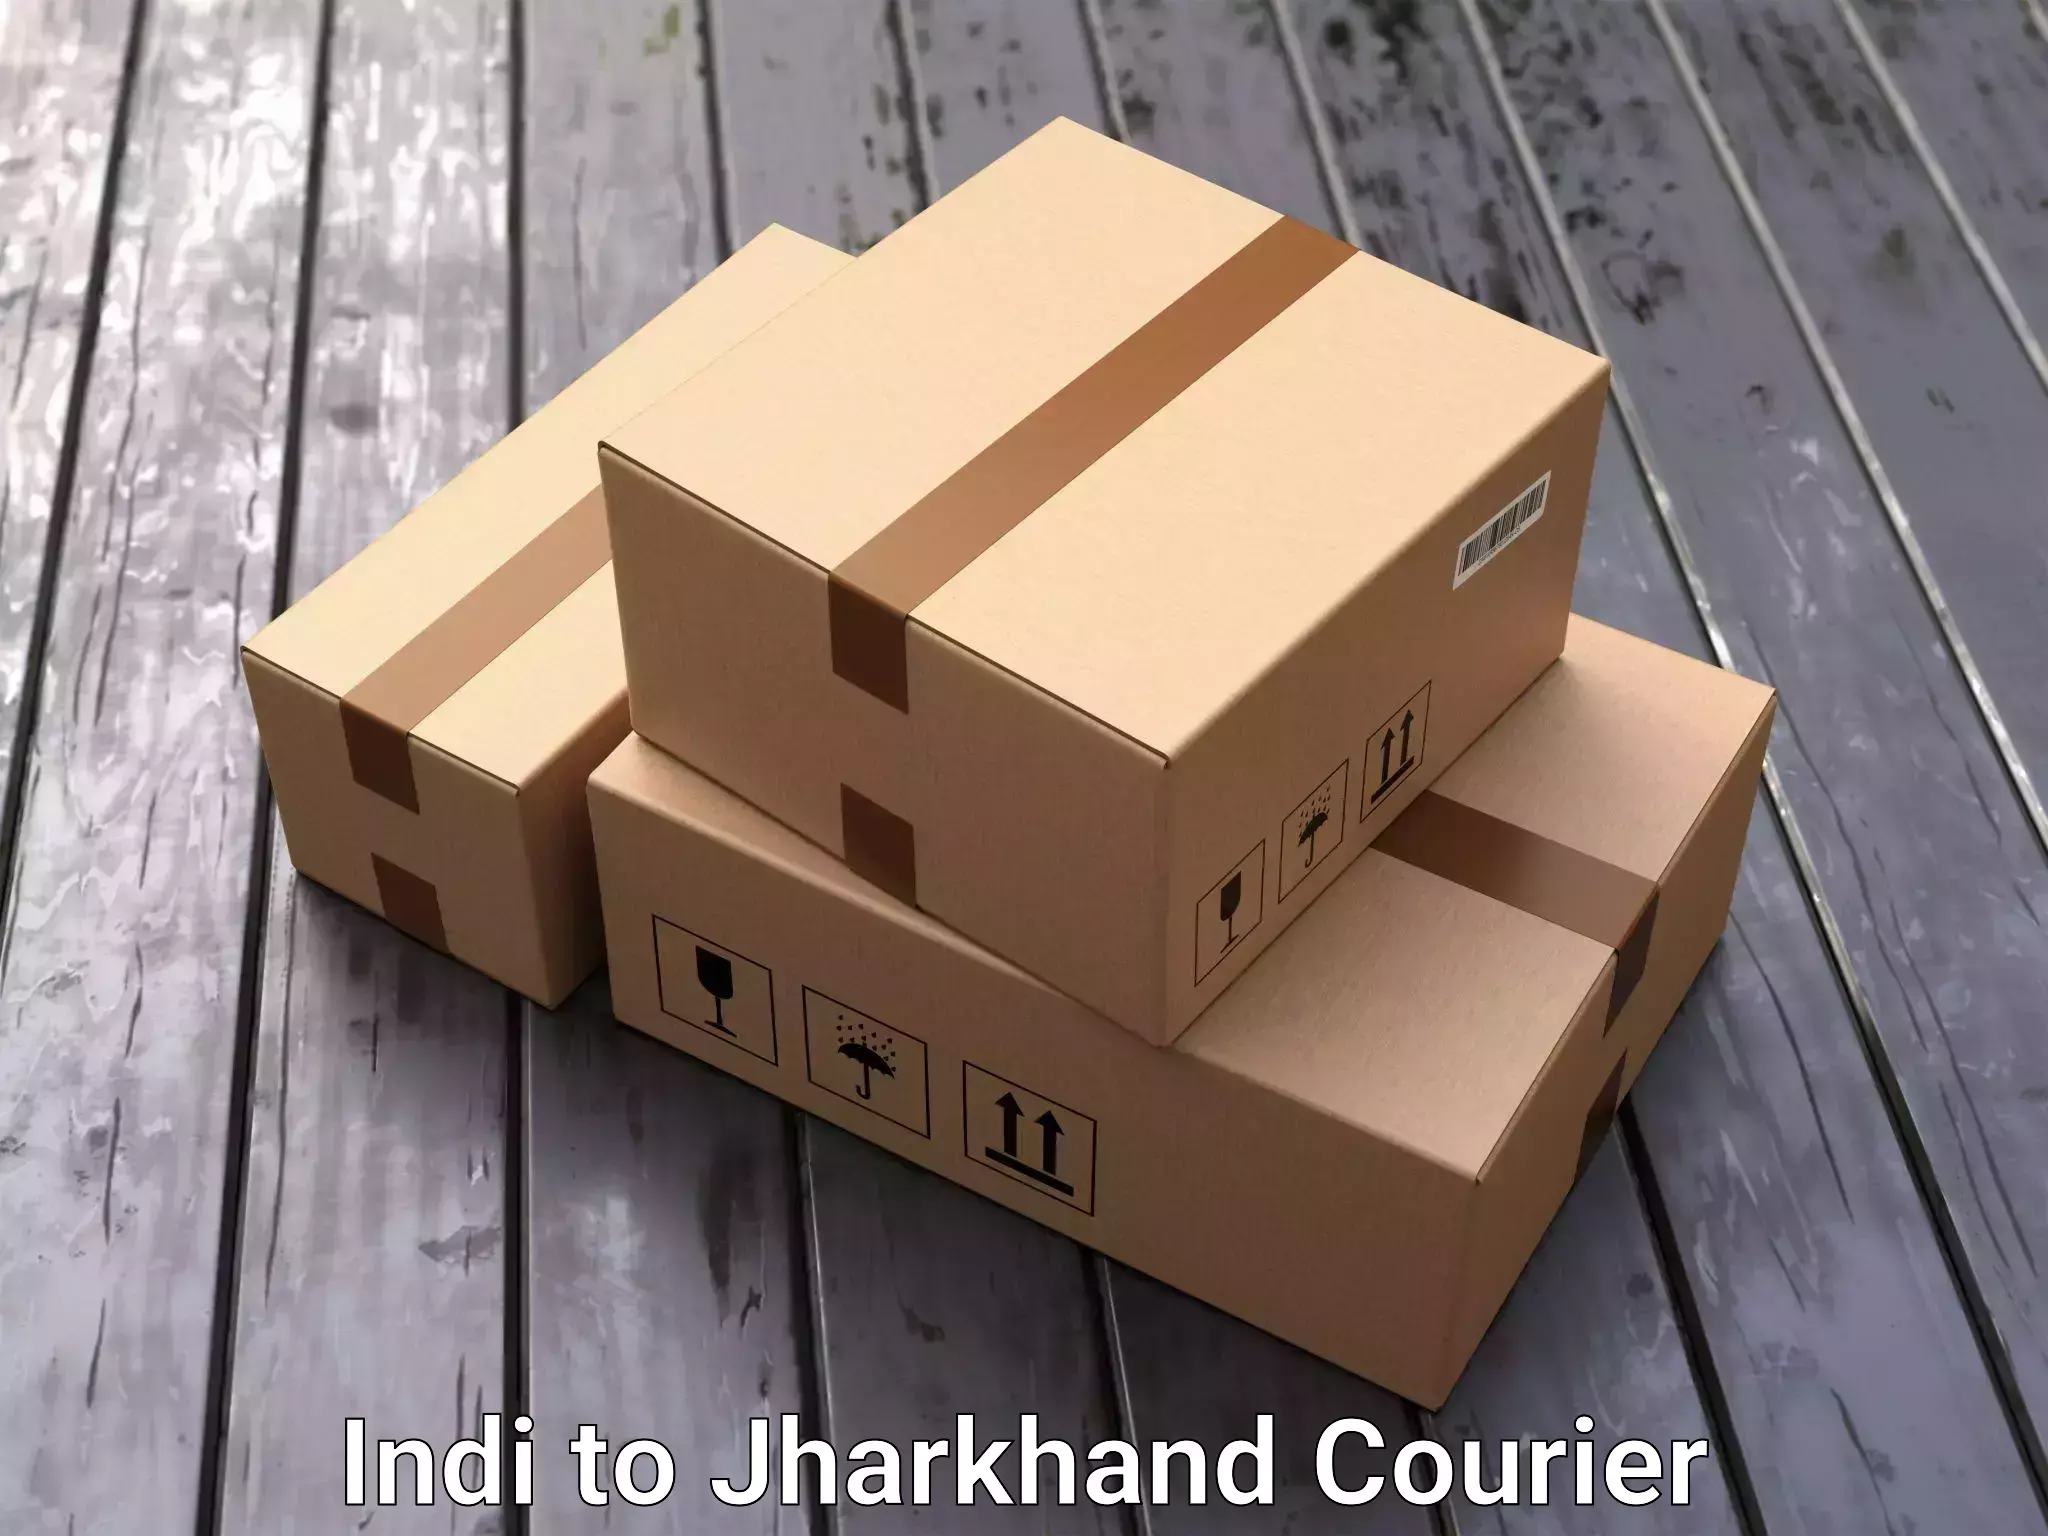 Furniture delivery service in Indi to Ranchi